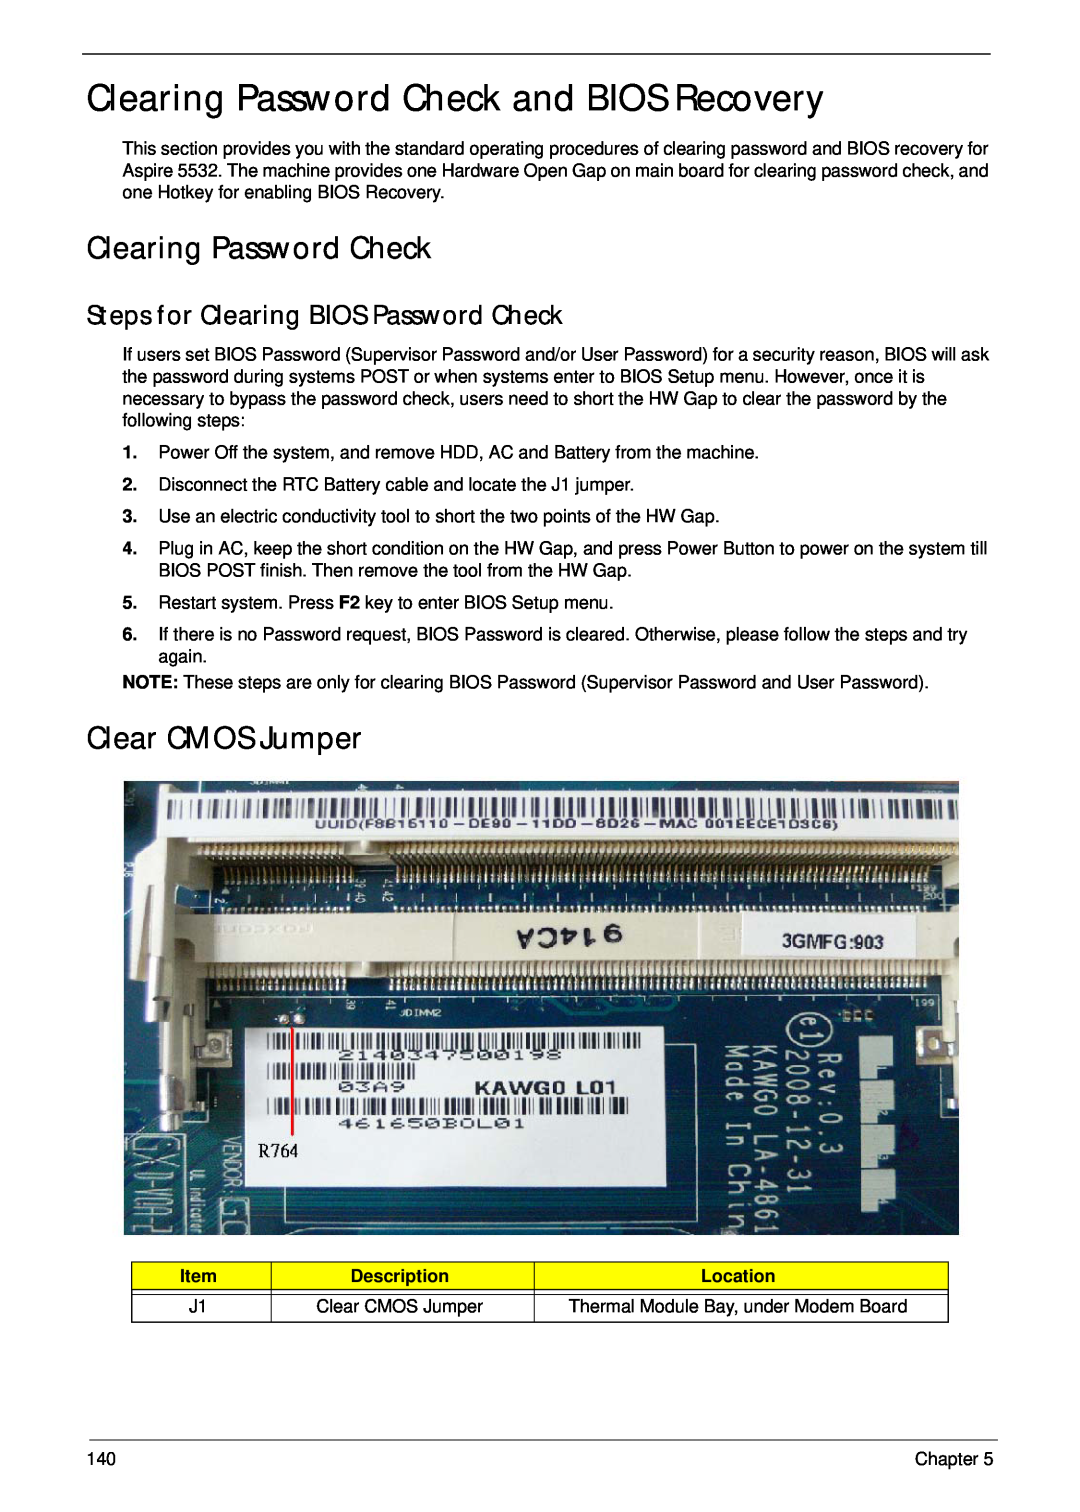 Acer 5532 Clearing Password Check and BIOS Recovery, Clear CMOS Jumper, Steps for Clearing BIOS Password Check, Location 